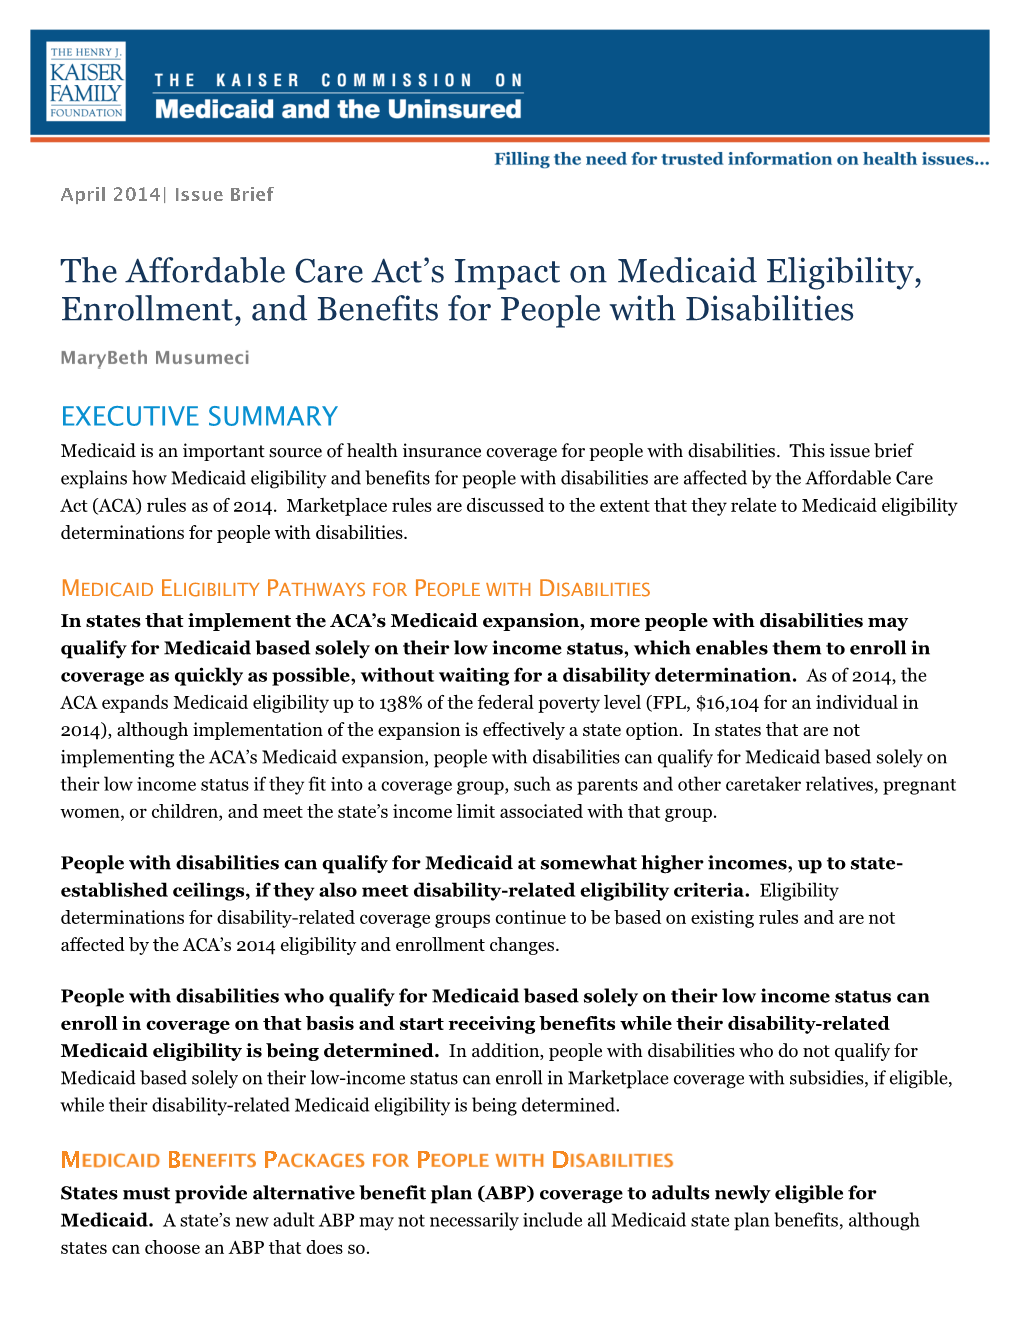 The Affordable Care Act's Impact on Medicaid Eligibility, Enrollment, and Benefits for People with Disabilities 2